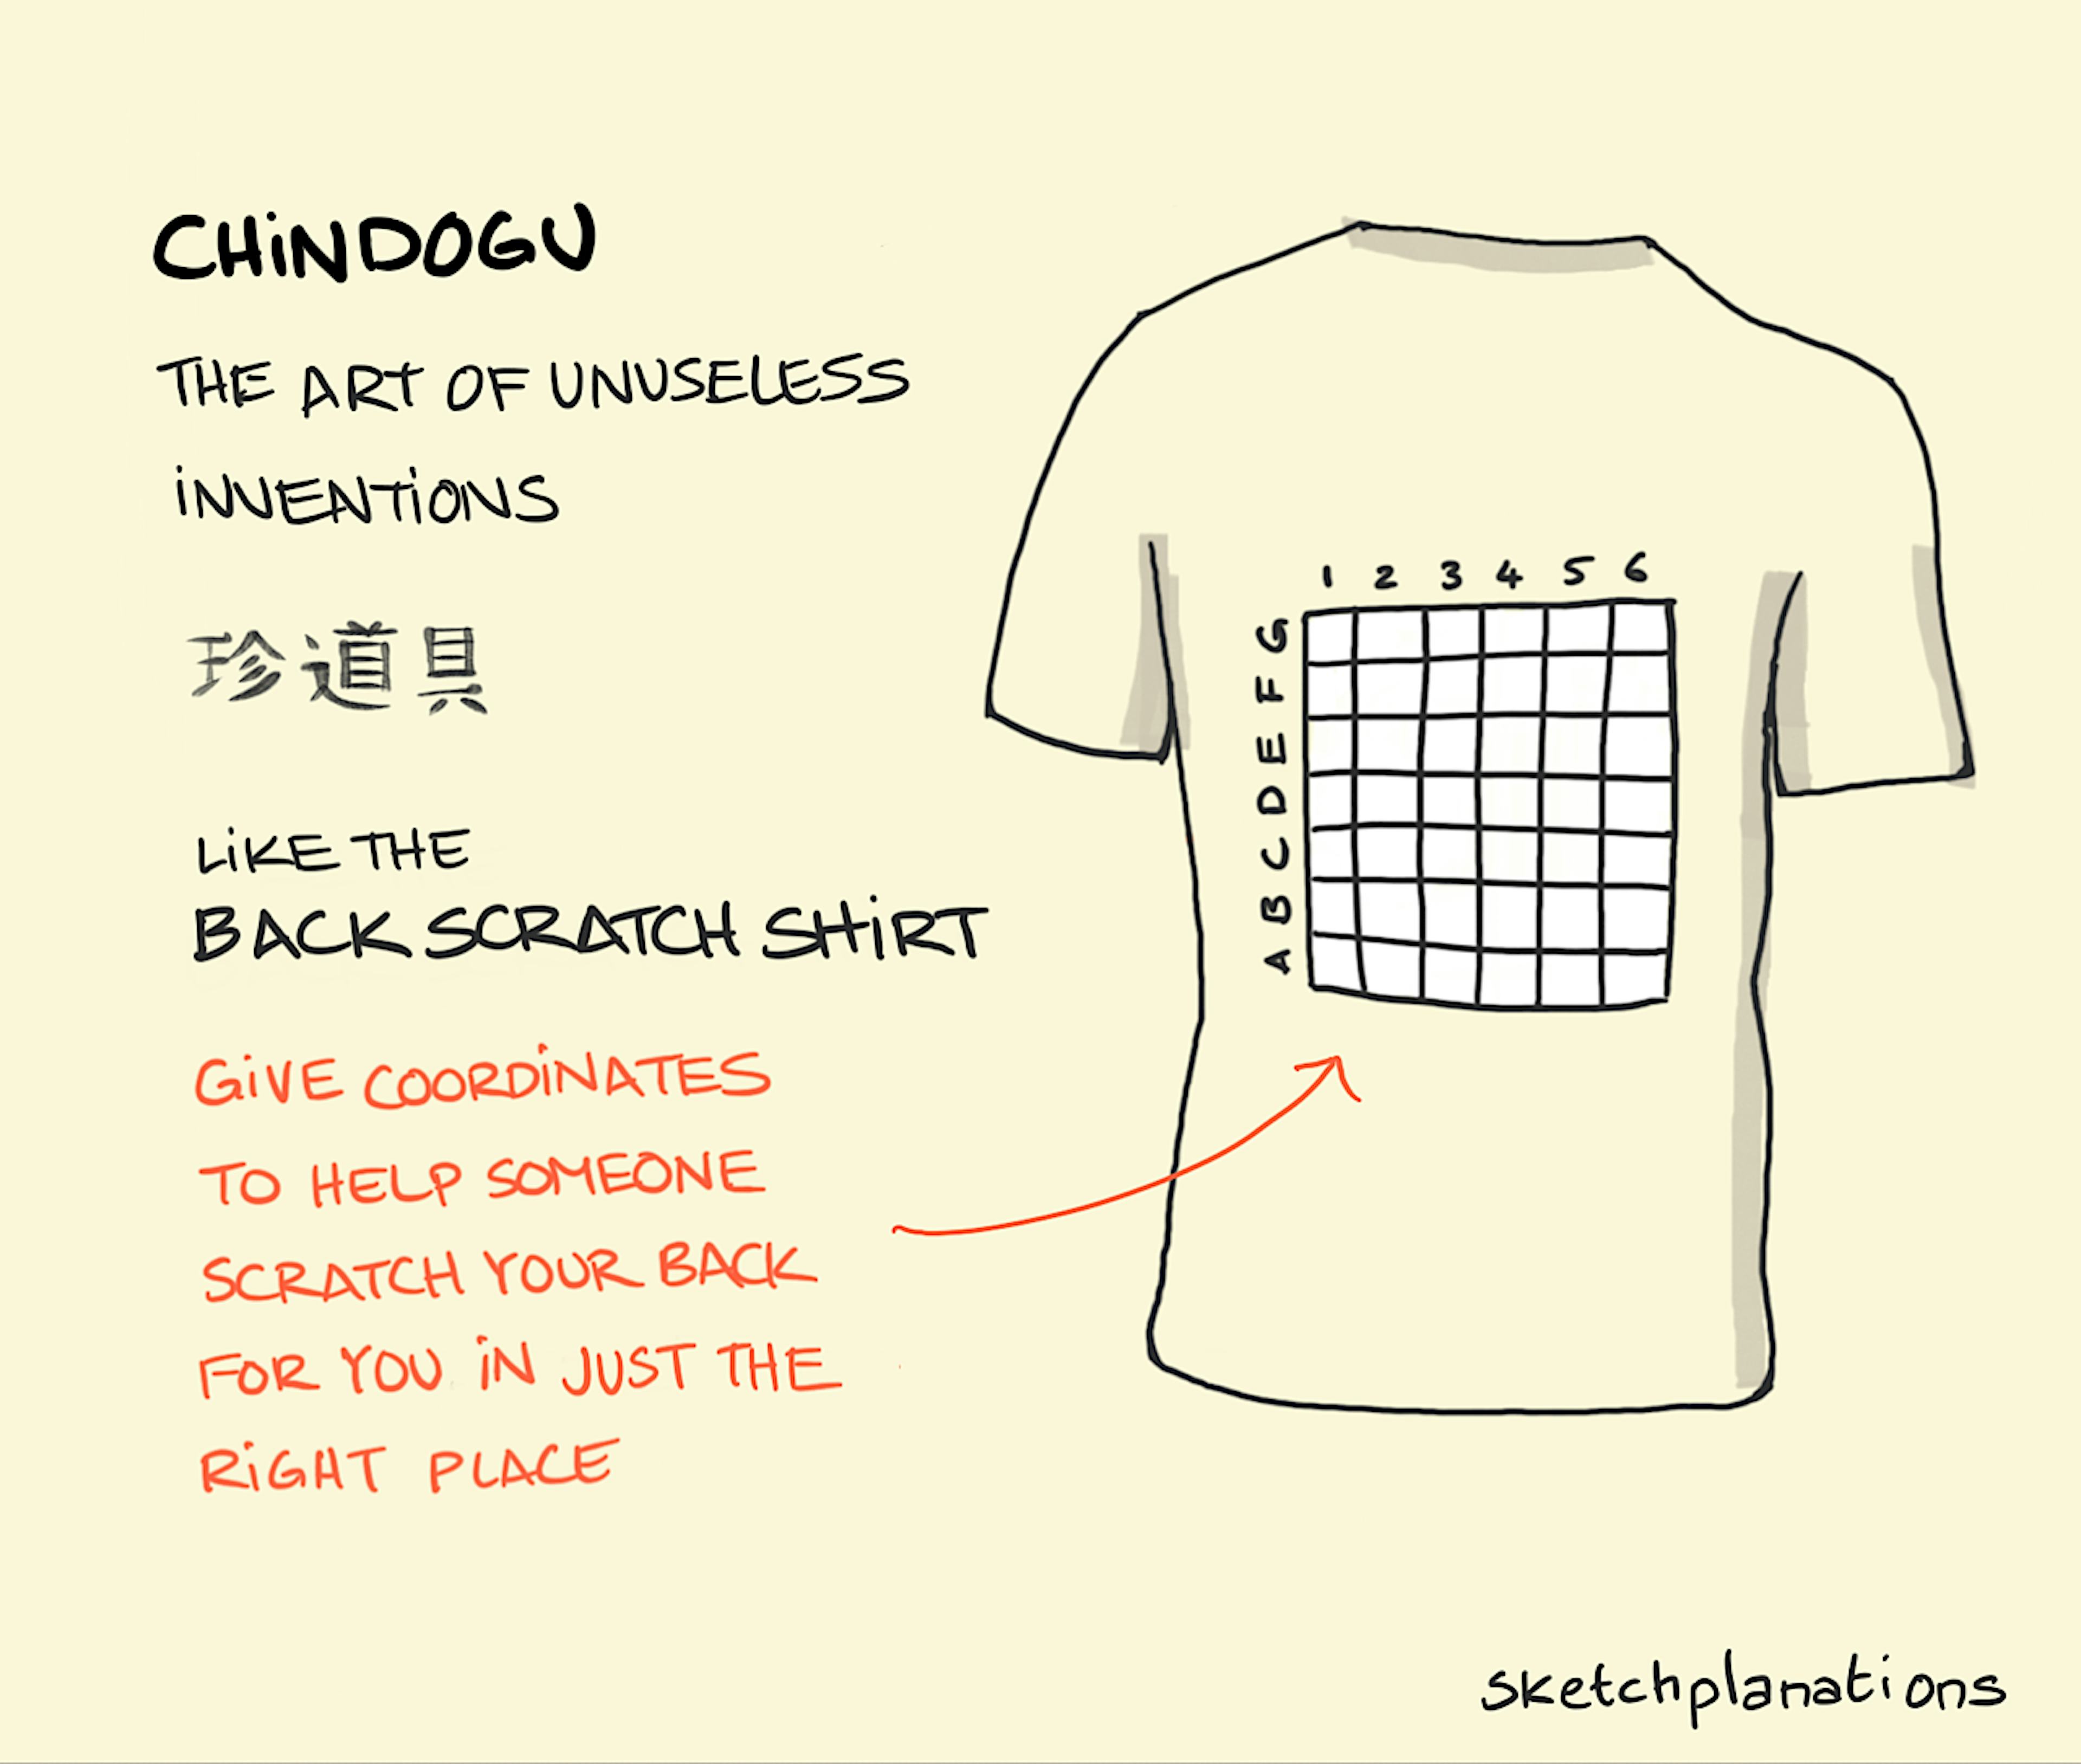 Chindogu example: A t-shirt with a labelled grid on the back could be a useful tool to guide someone to the exact coordinates you'd like your back scratched. 